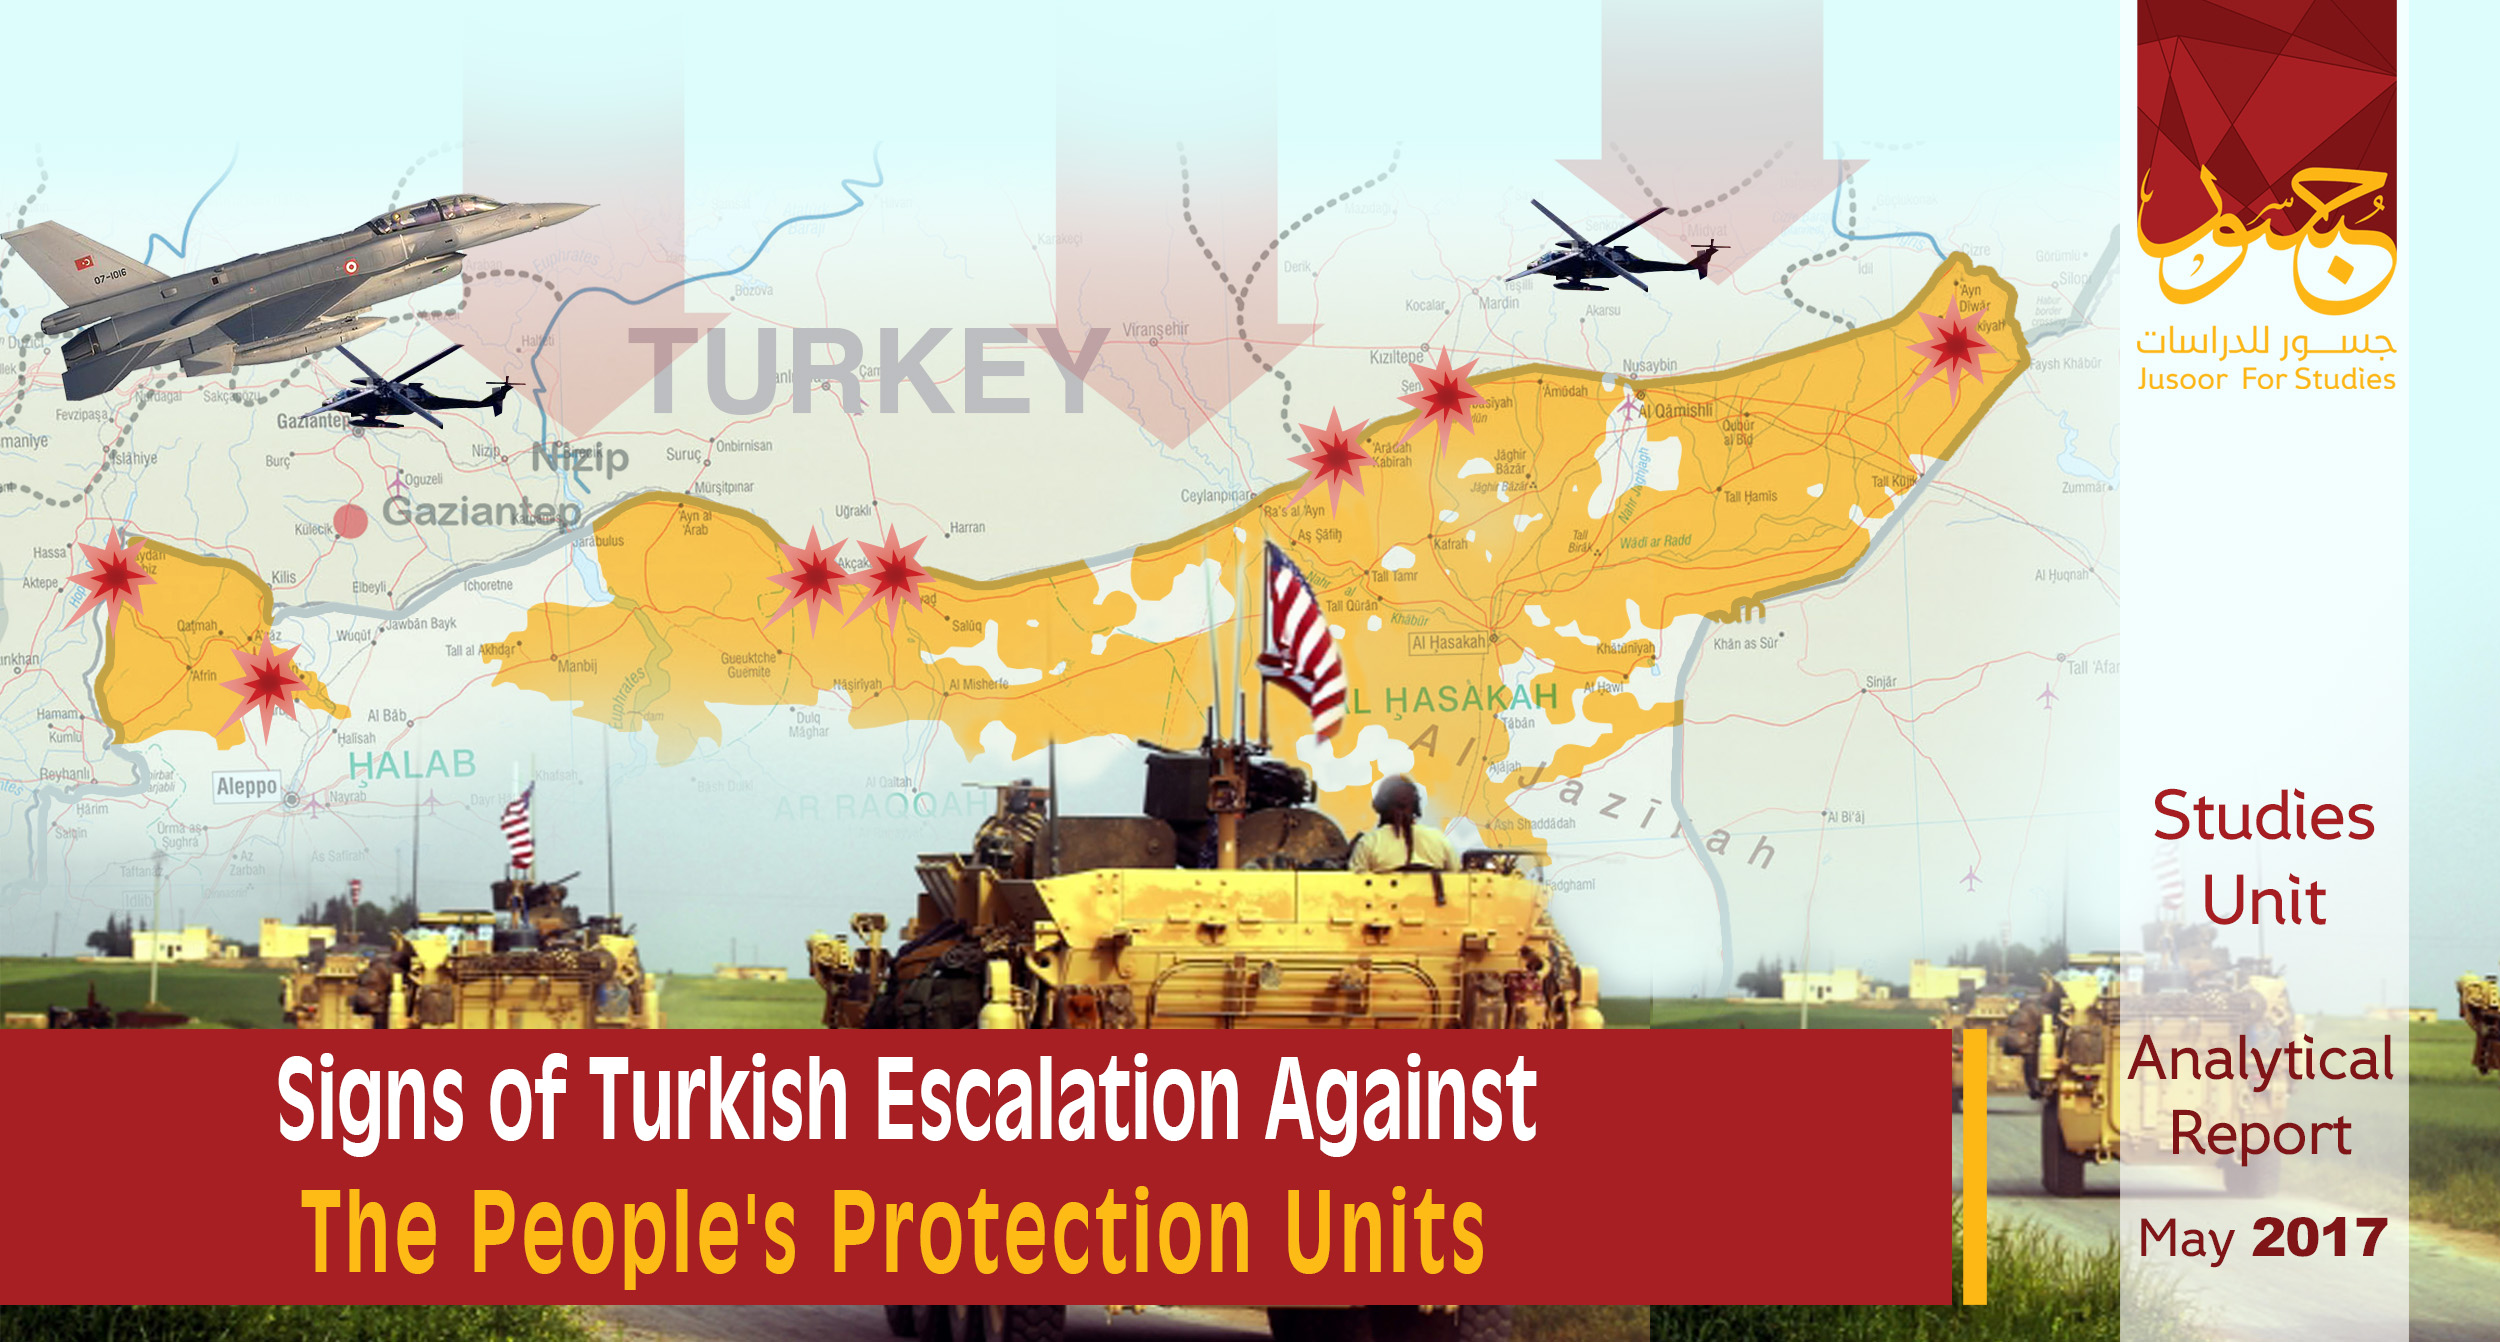 Signs of Turkish Escalation Against the People's Protection Units